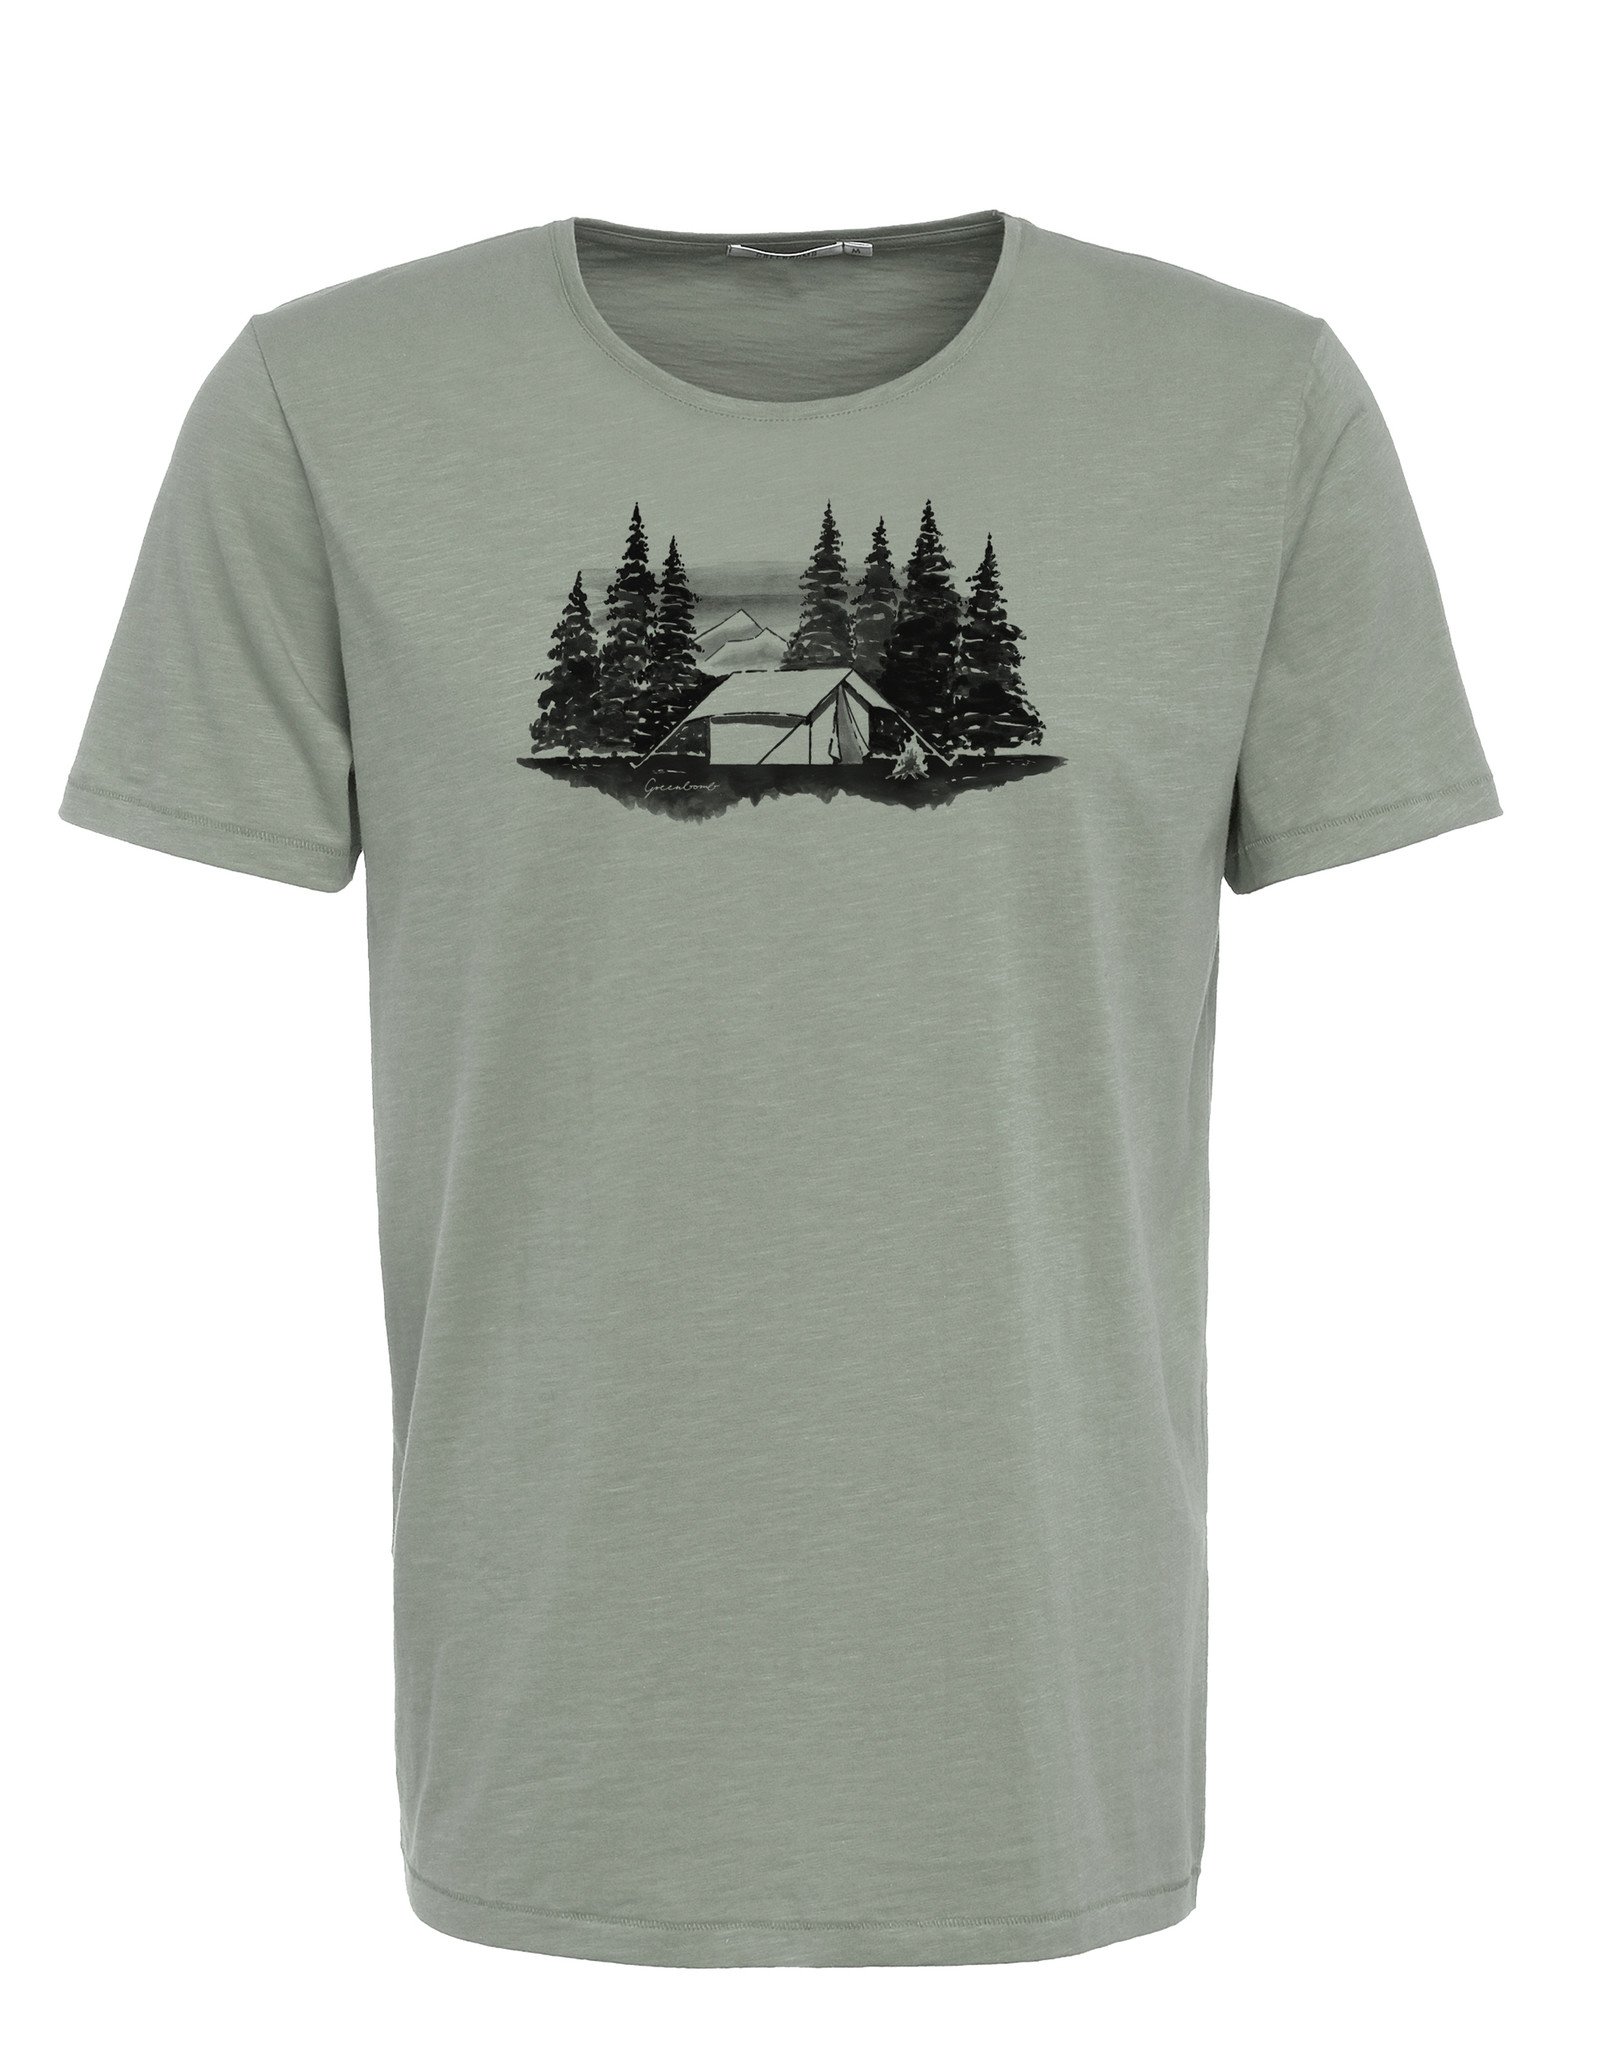 Greenbomb T-SHIRT NATURE CAMP MOUNTAINS OLIVE